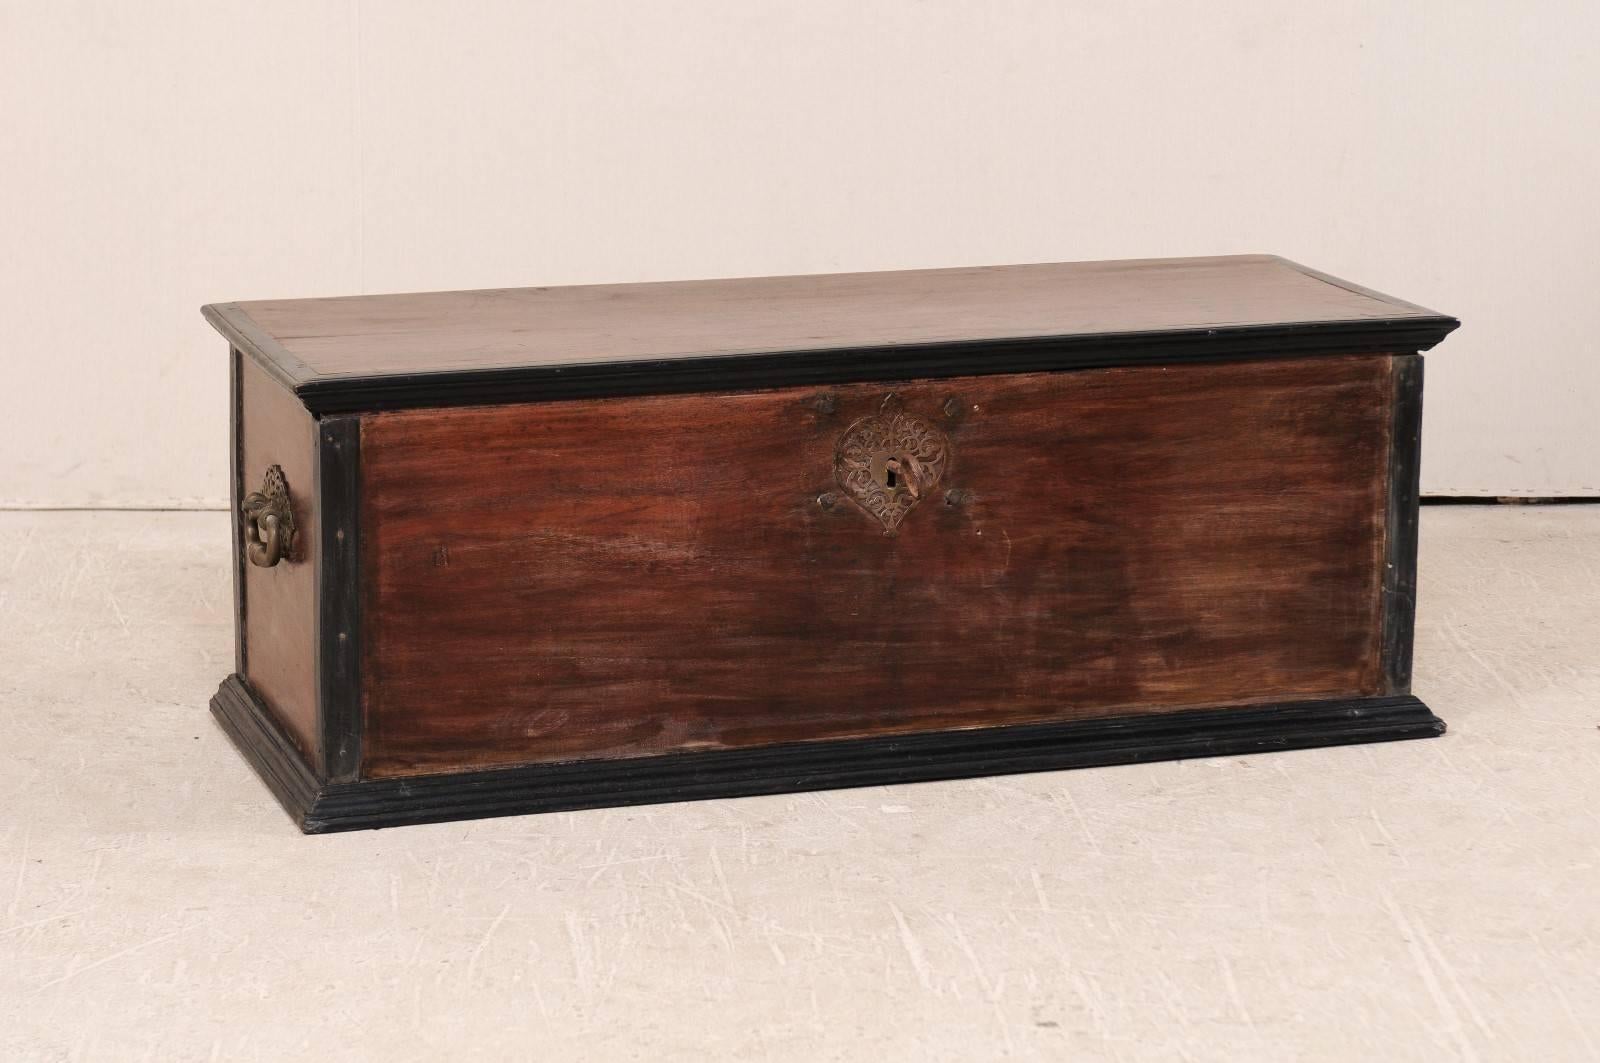 An early 20th century large size wood coffer. This Indian trunk from the early 20th century has a rich wood tone, and is accented with black along the top and bottom trims, as well as each corner post. This coffer is adorn with nicely sized handles